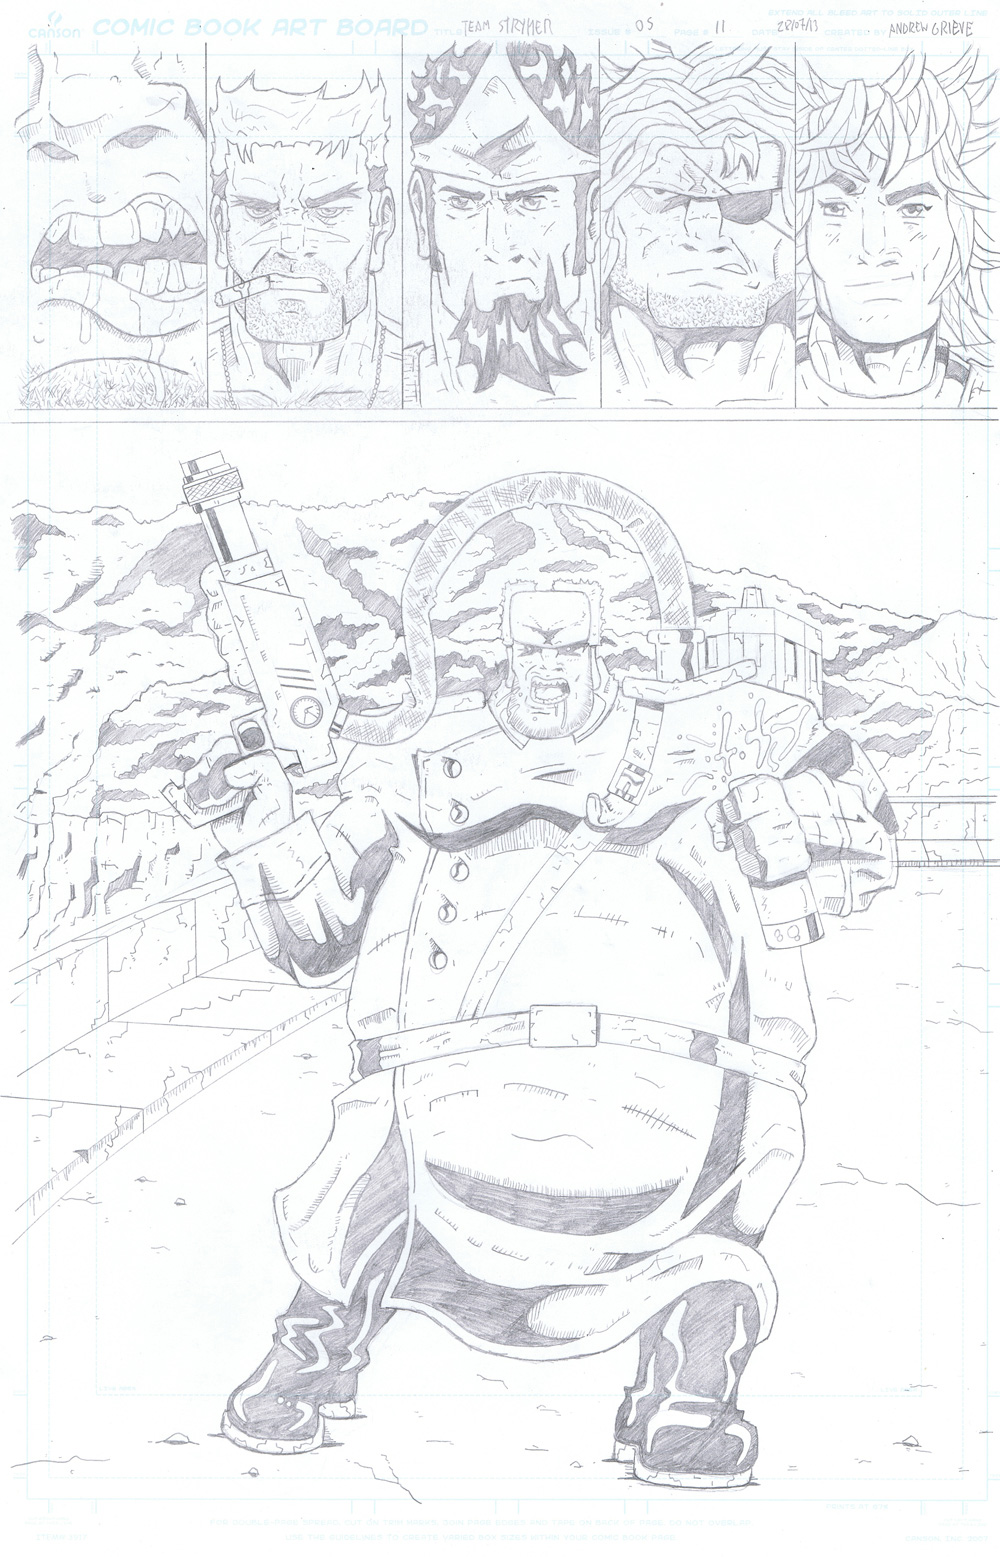 MISSION 005: PAGE 11 PENCIL